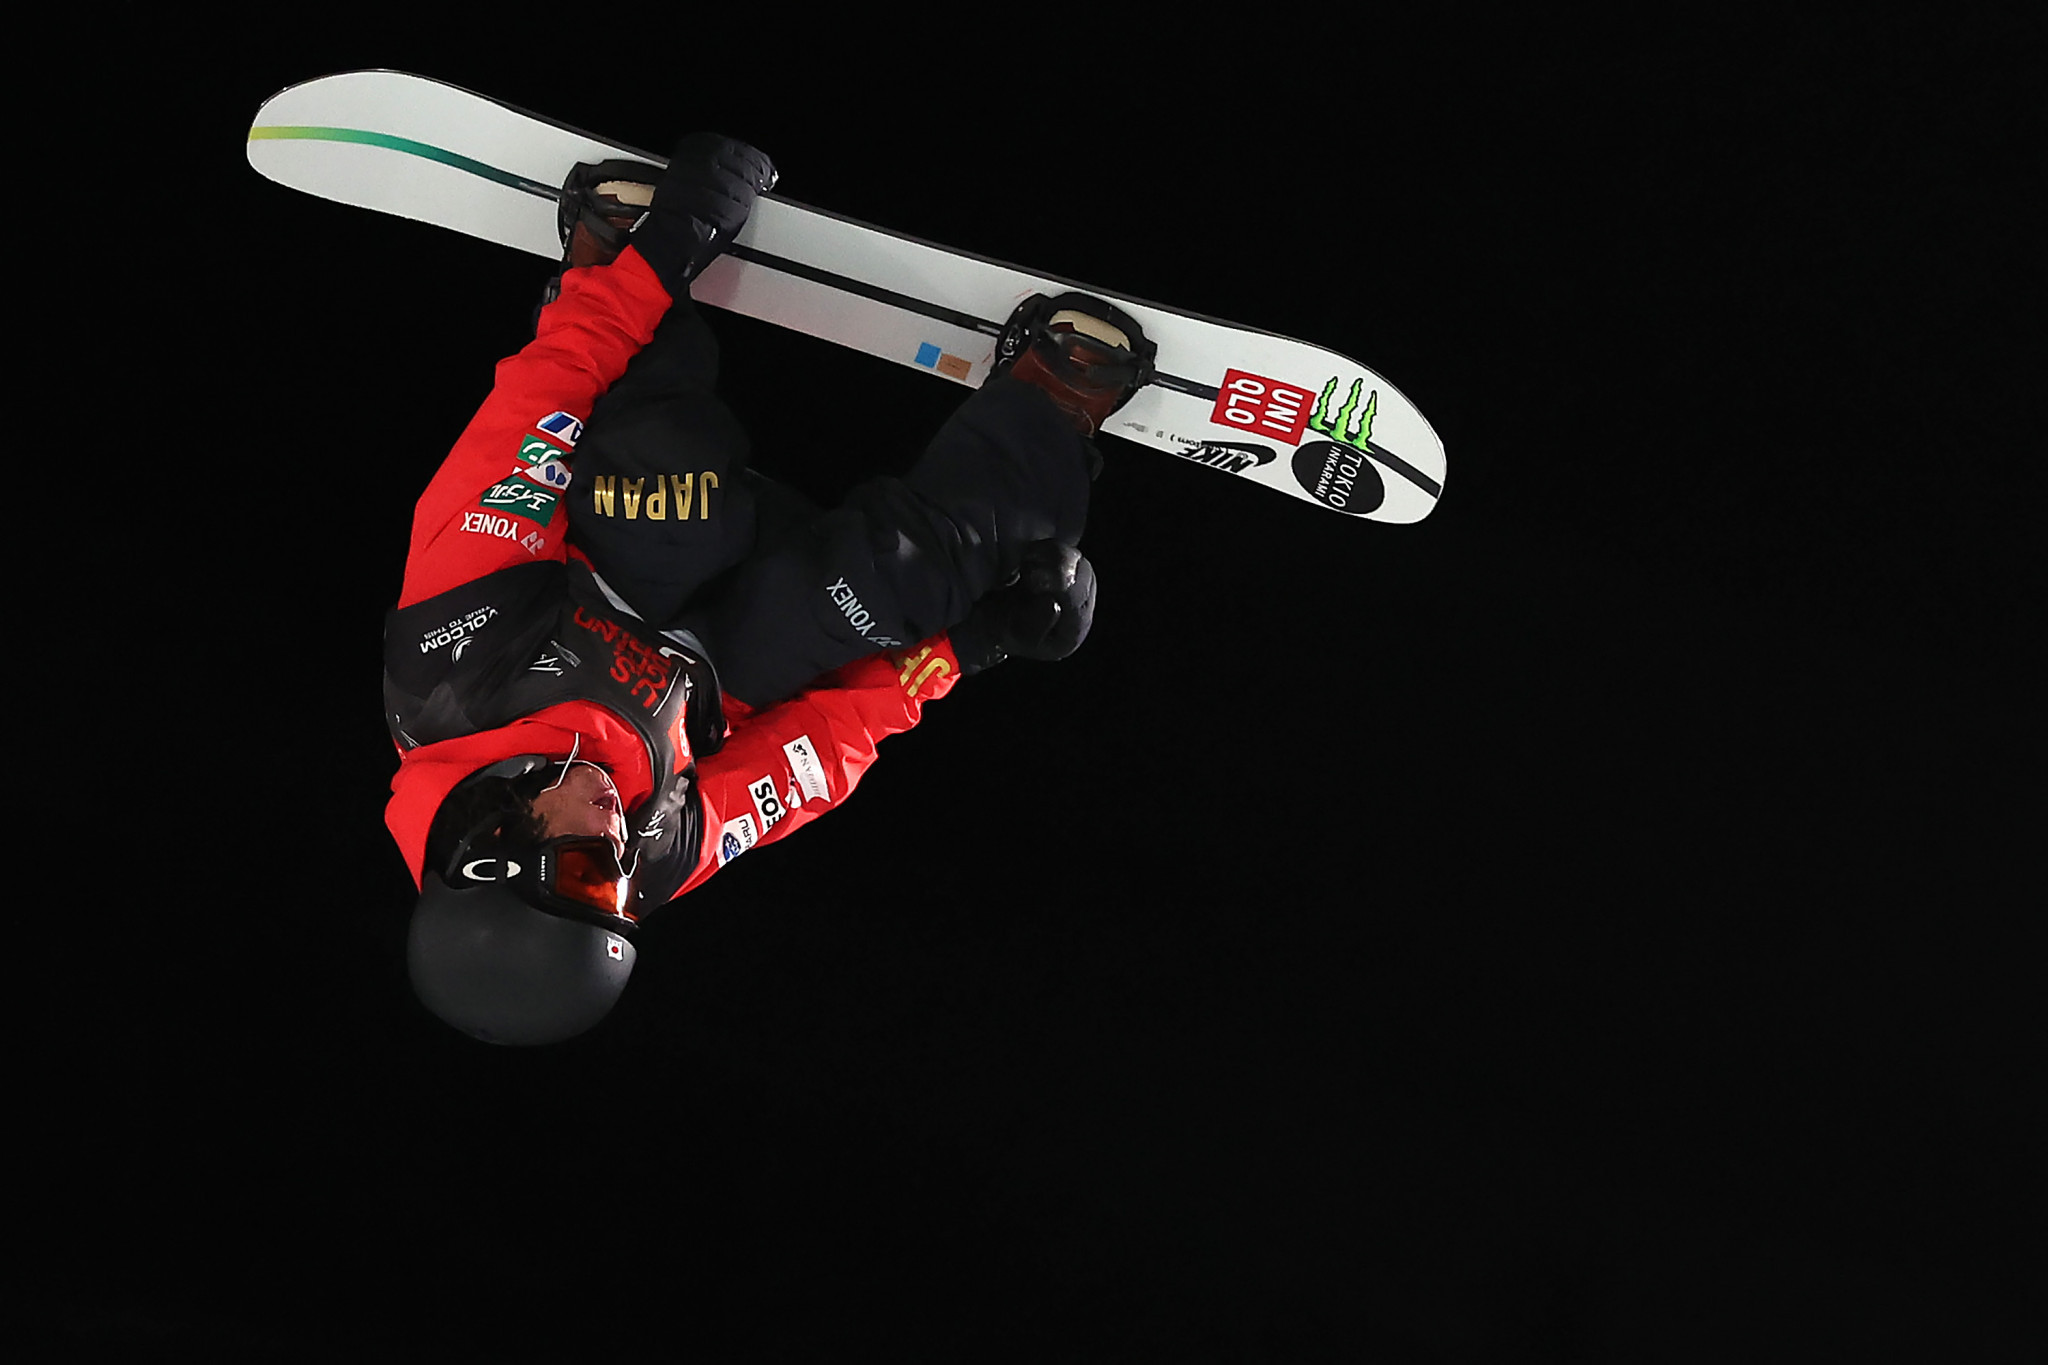 Hirano among medal contenders named in Japanese ski and snowboard squad for Beijing 2022